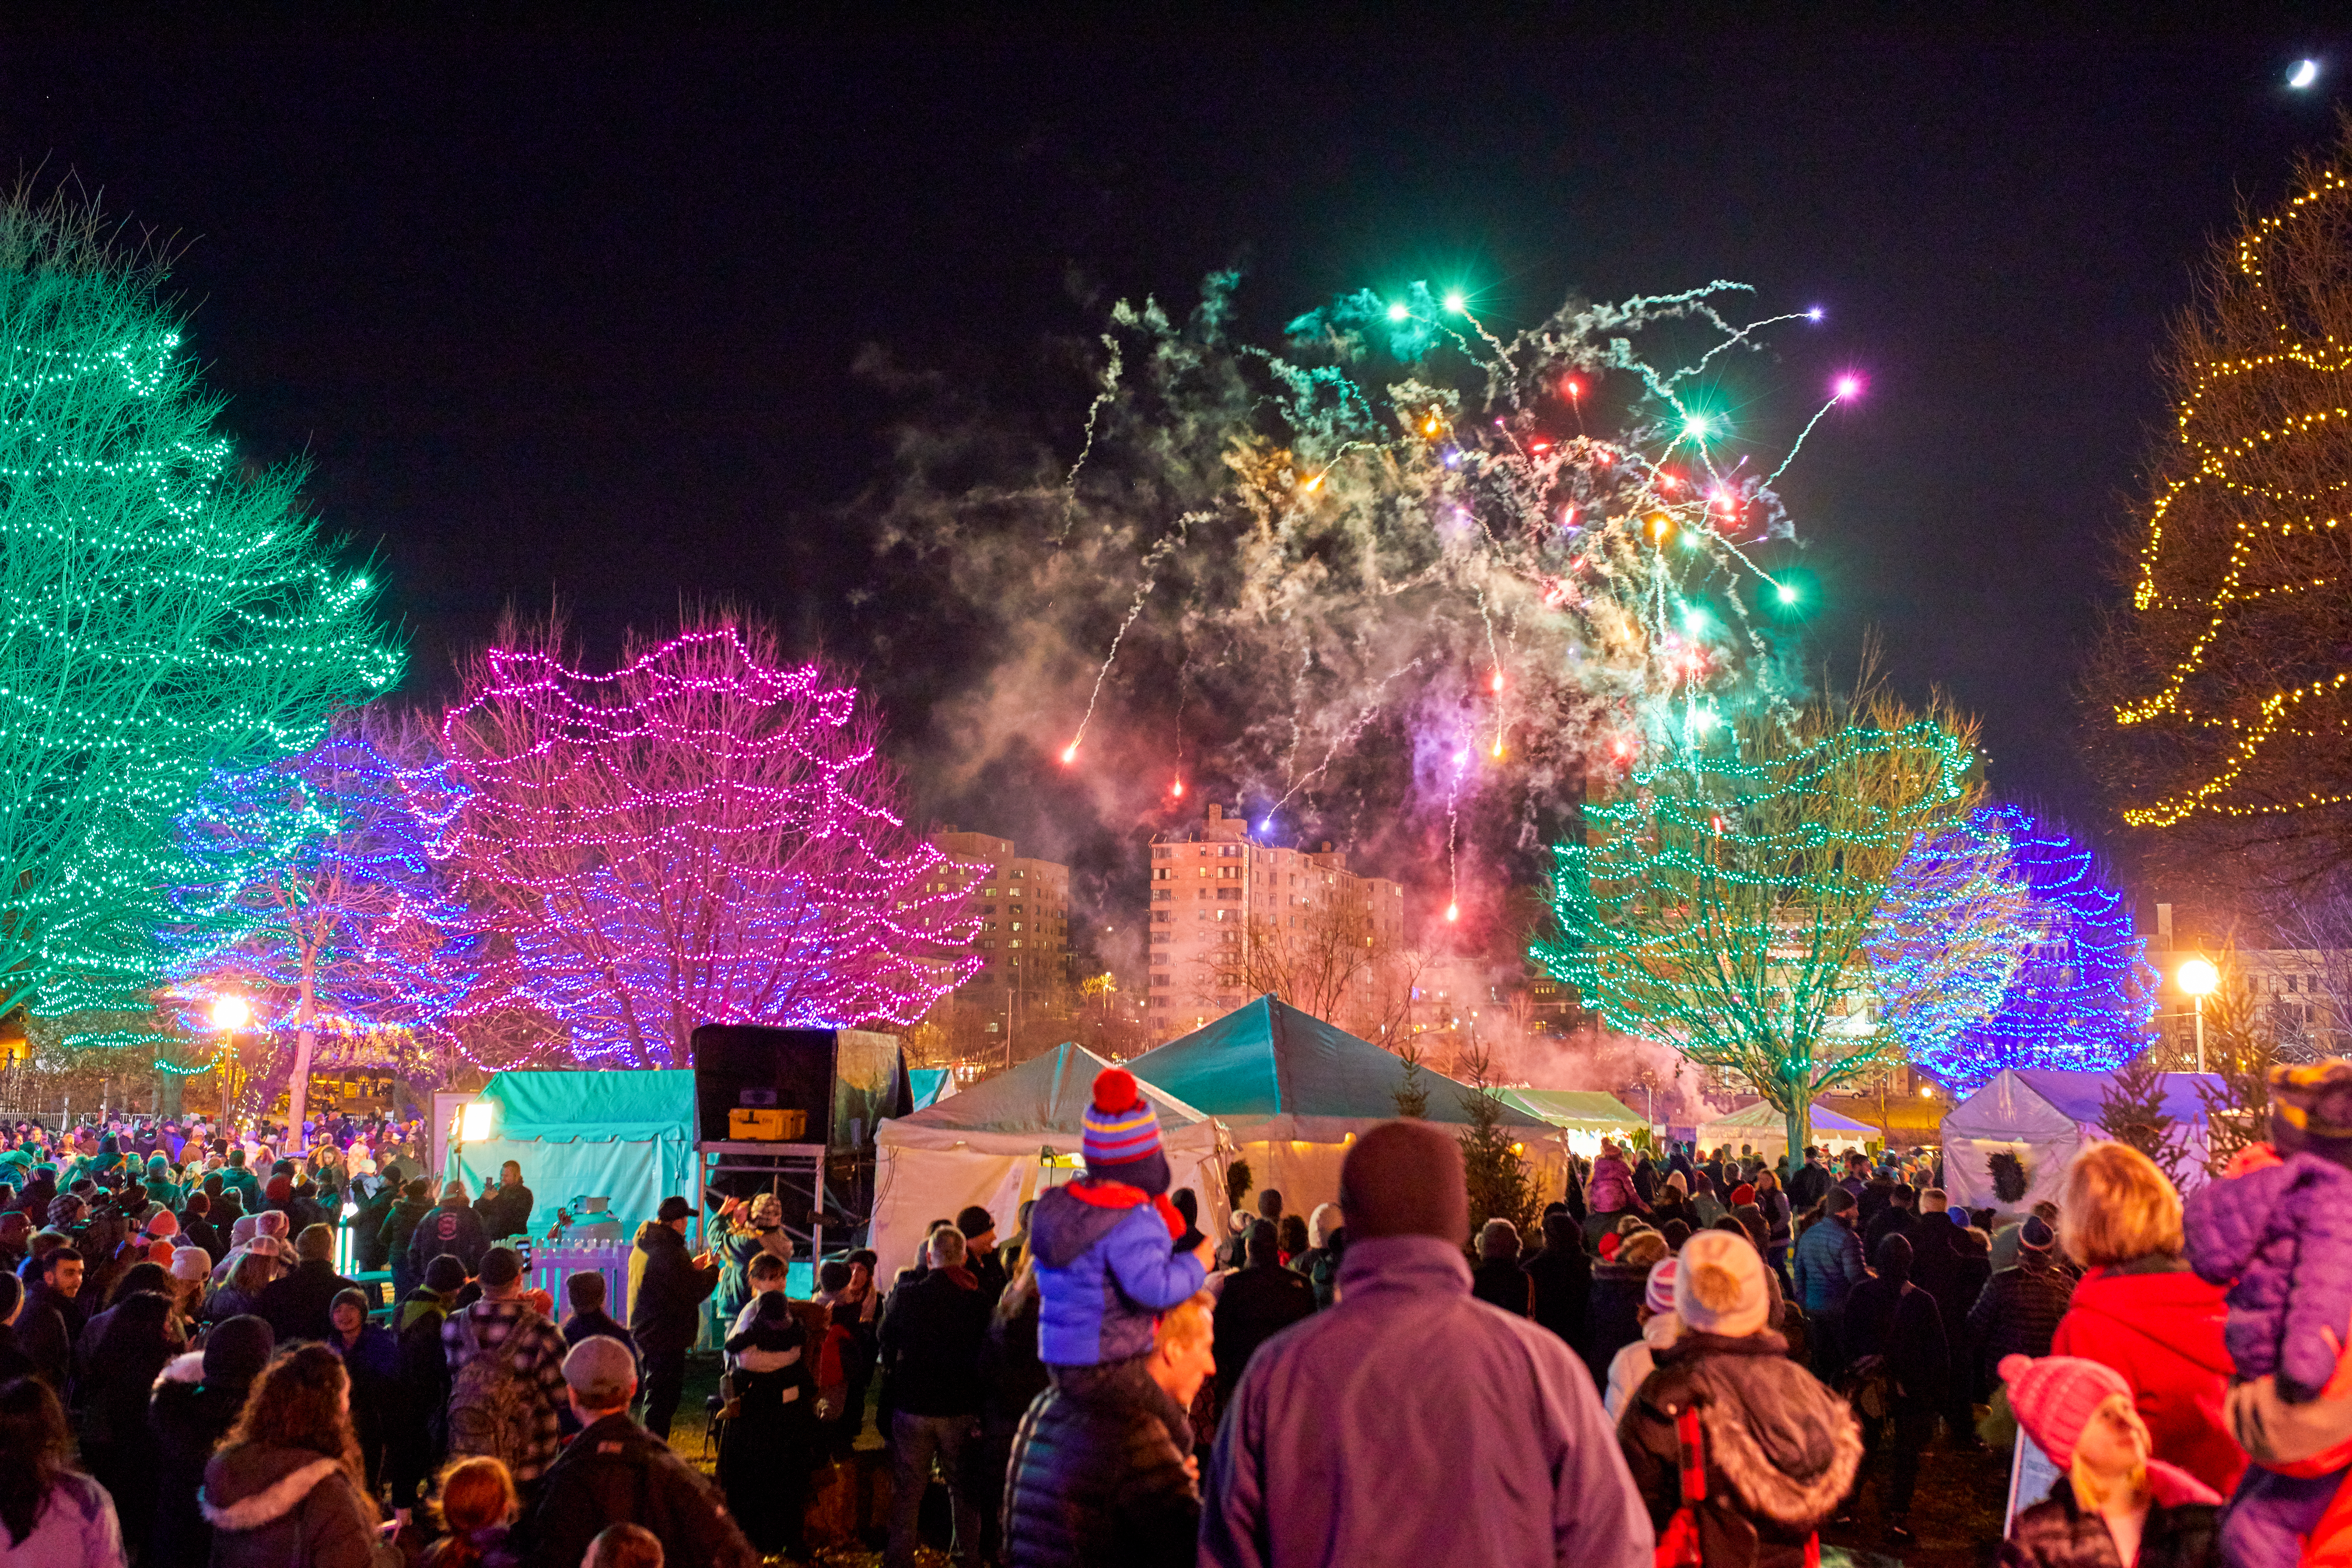 Client Spotlight: Dazzling Minneapolis with Holiday Cheer